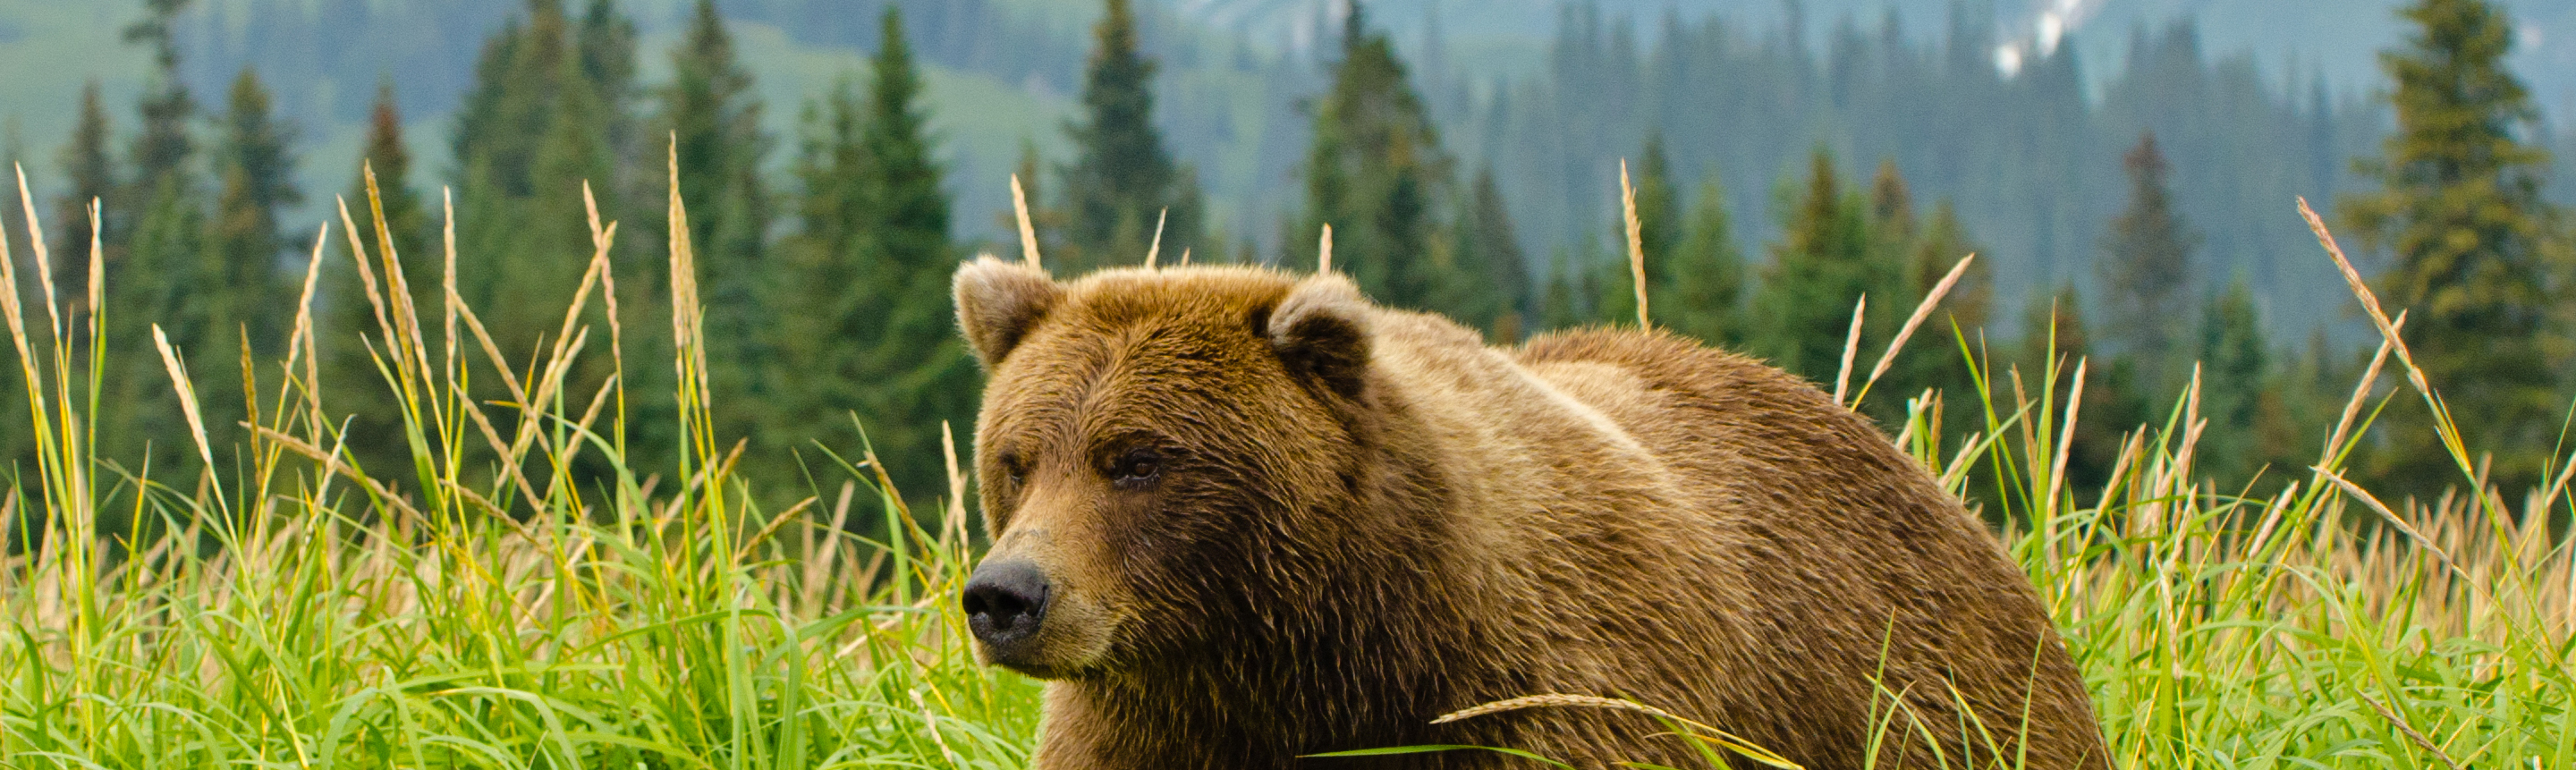 31-Year-Old Woman Dies After Being Chased By A Bear In Slovakia